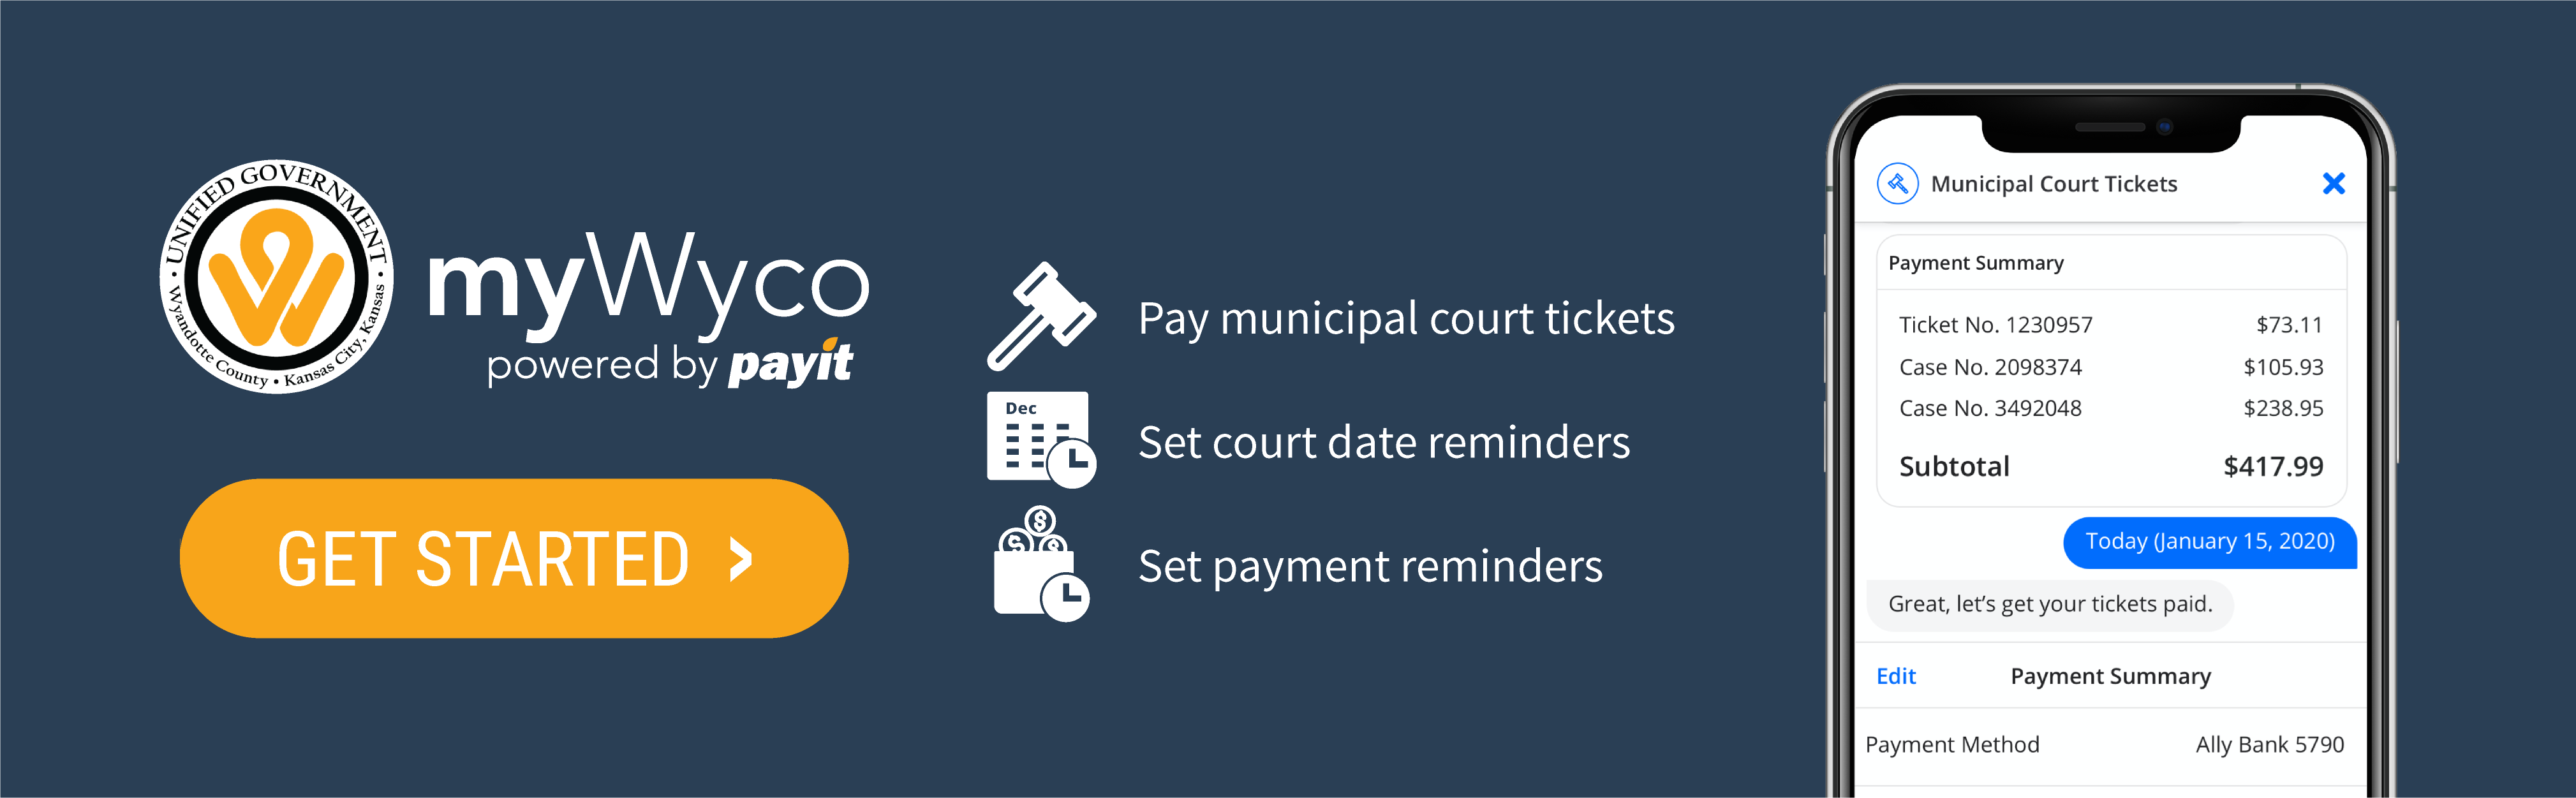 myWyco_Web-Placements_Court-Tickets_Hero_969x300_2.png